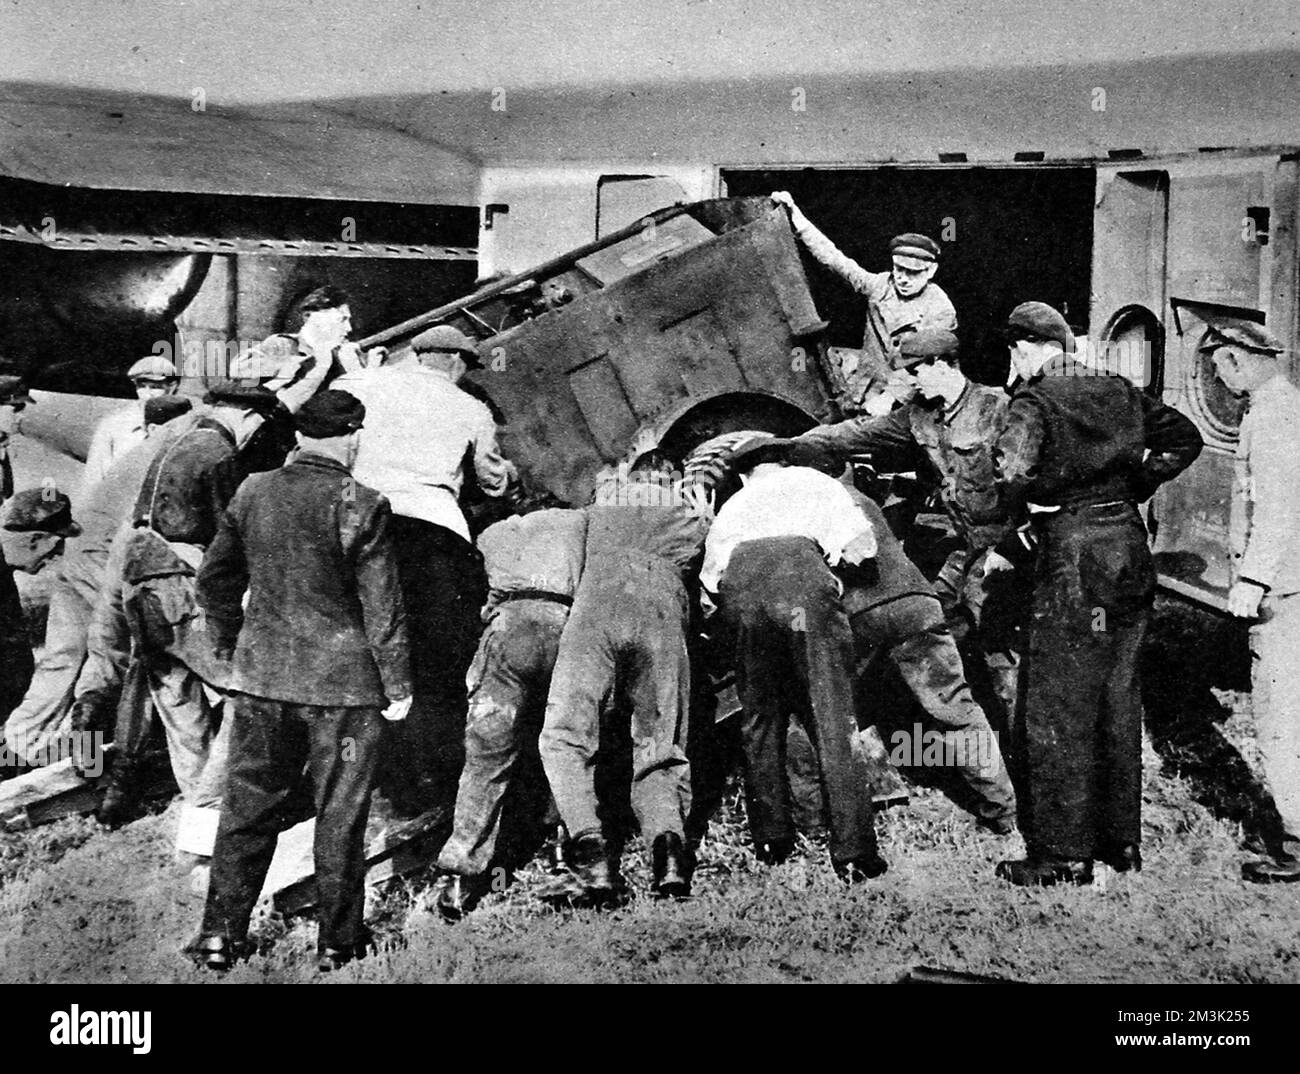 Photograph showing a generator set being unloaded from a 'York' aircraft at Gatow Airport, during the 'Berlin Airlift', 1948.    Between April 1948 and May 1949 Stalin, leader of the USSR, imposed a land blockade on supplies from Western Europe to West Berlin.  In response the British and American governments organised an enormous airlift to supply food and other essentials to the 2.5 million inhabitants of West Berlin.  After a year Stalin conceded defeat and lifted the land blockade.     Date: 1948 Stock Photo